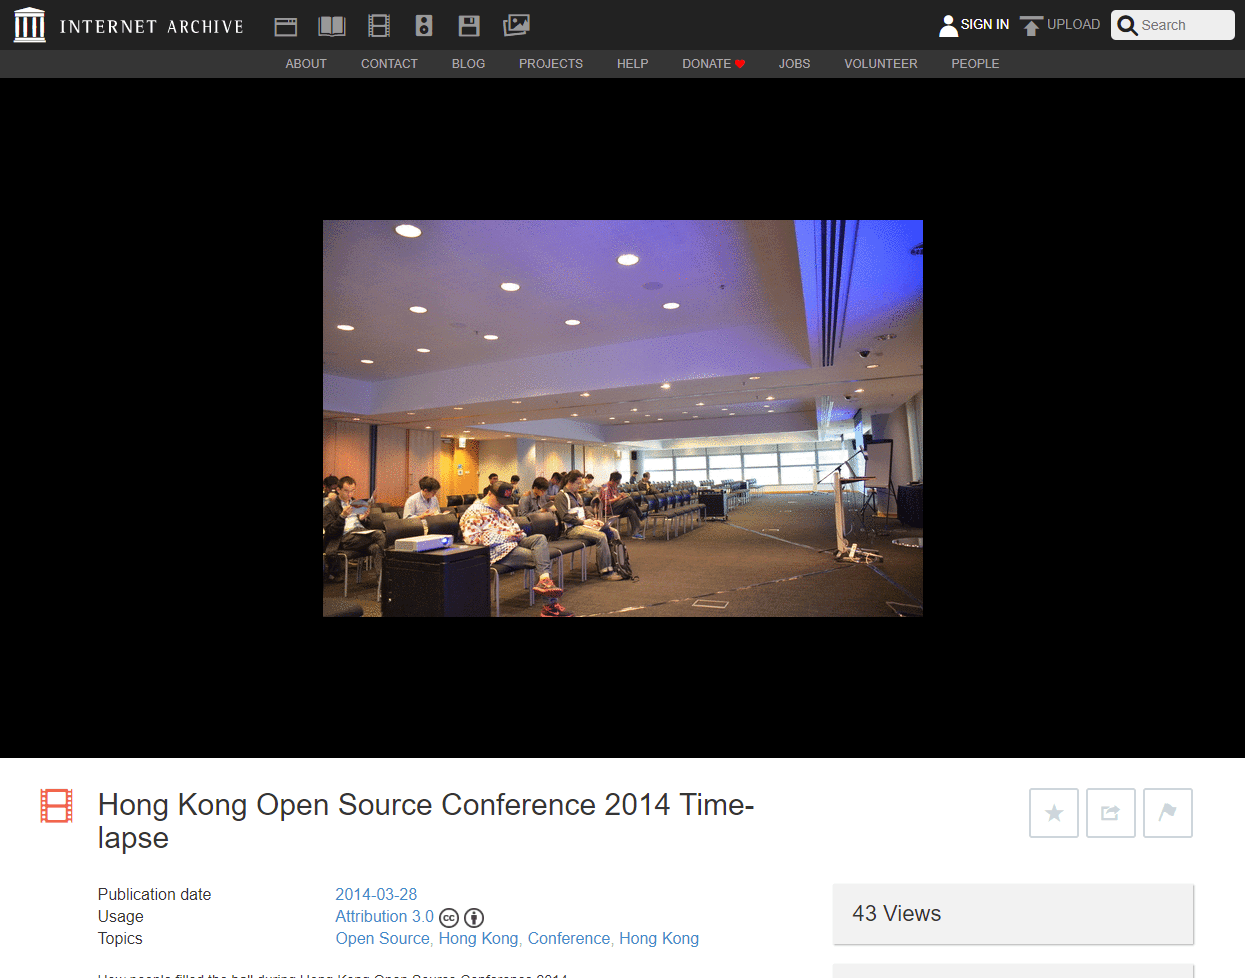 Hong Kong Open Source Conference 2014 Time-lapse